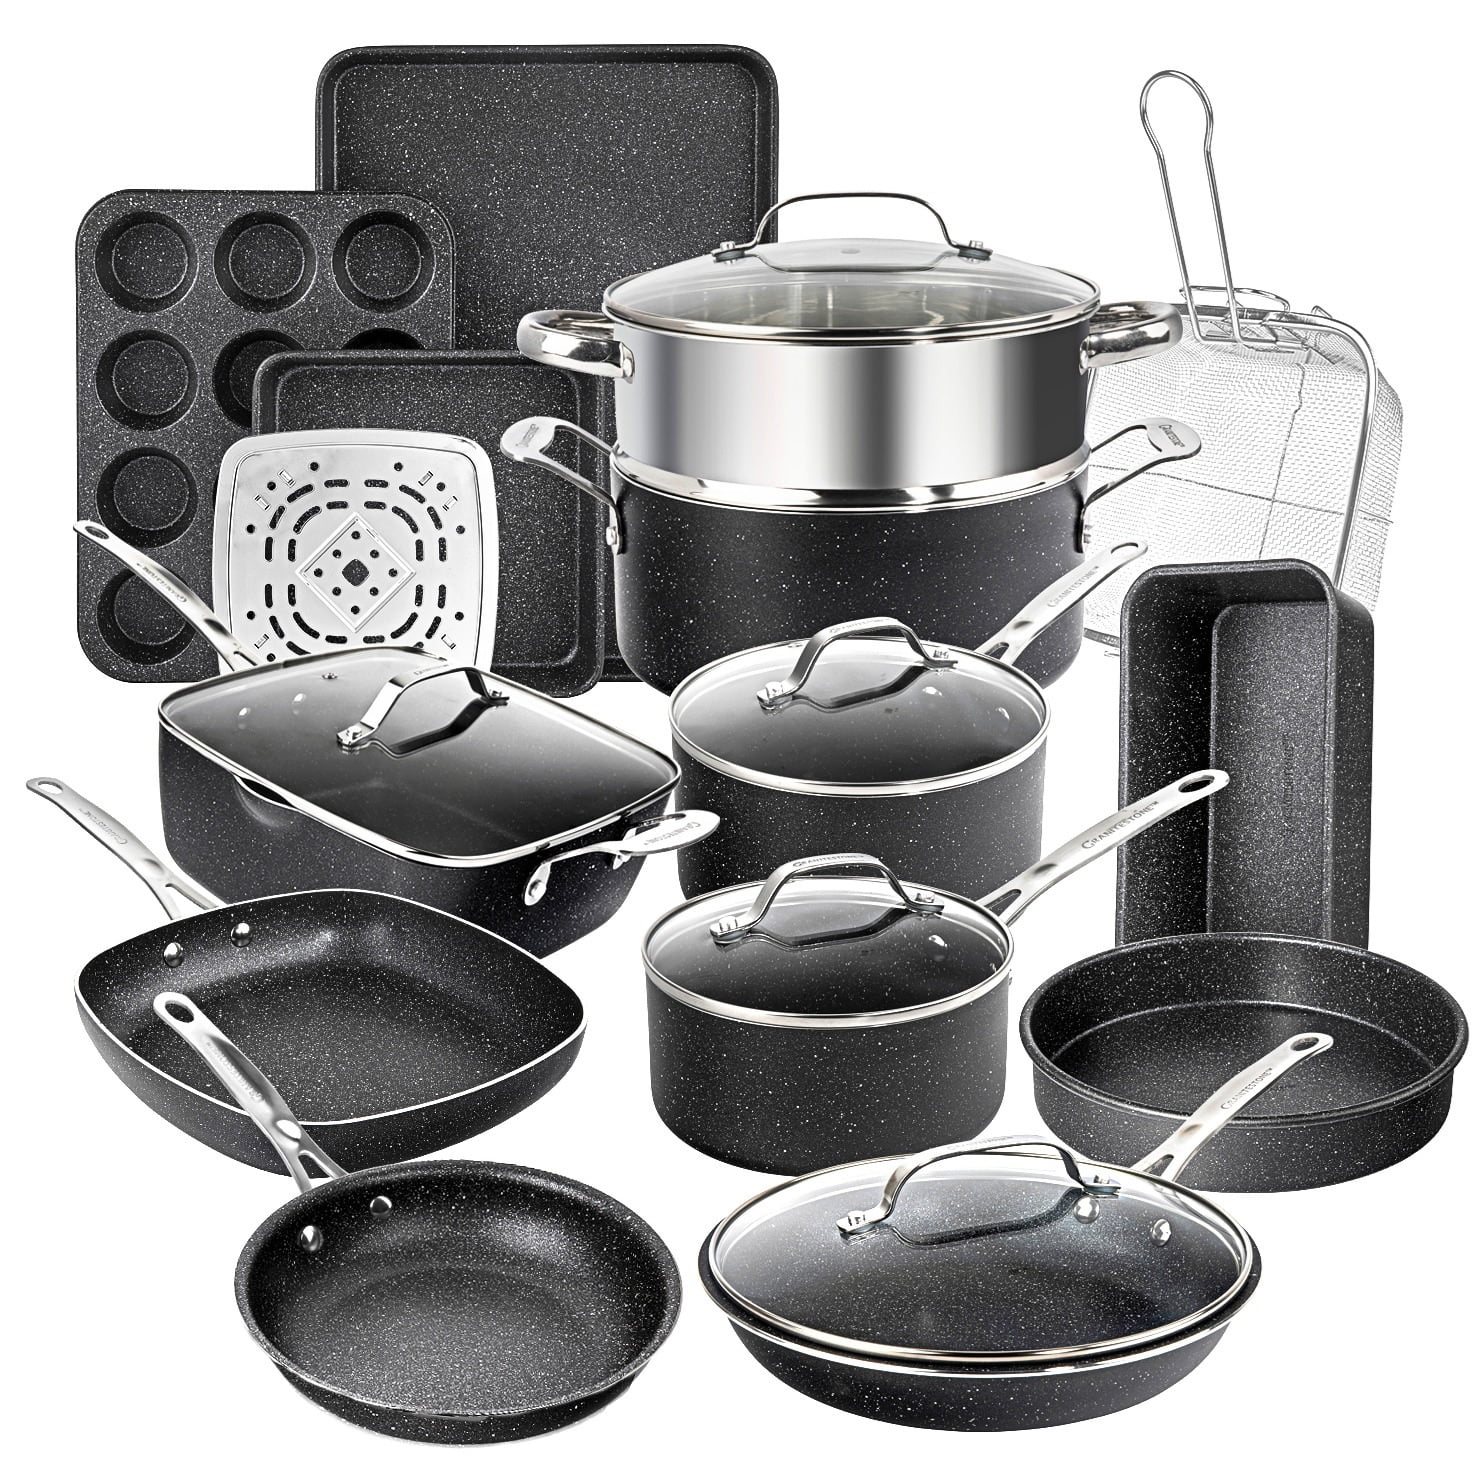 Home Hero 20 Pcs Pots and Pans Set Non Stick - All-In-One Induction Granite  Cookware Set + Bakeware Set - Non Toxic, PFOA Free, Oven Safe Pot and Pan